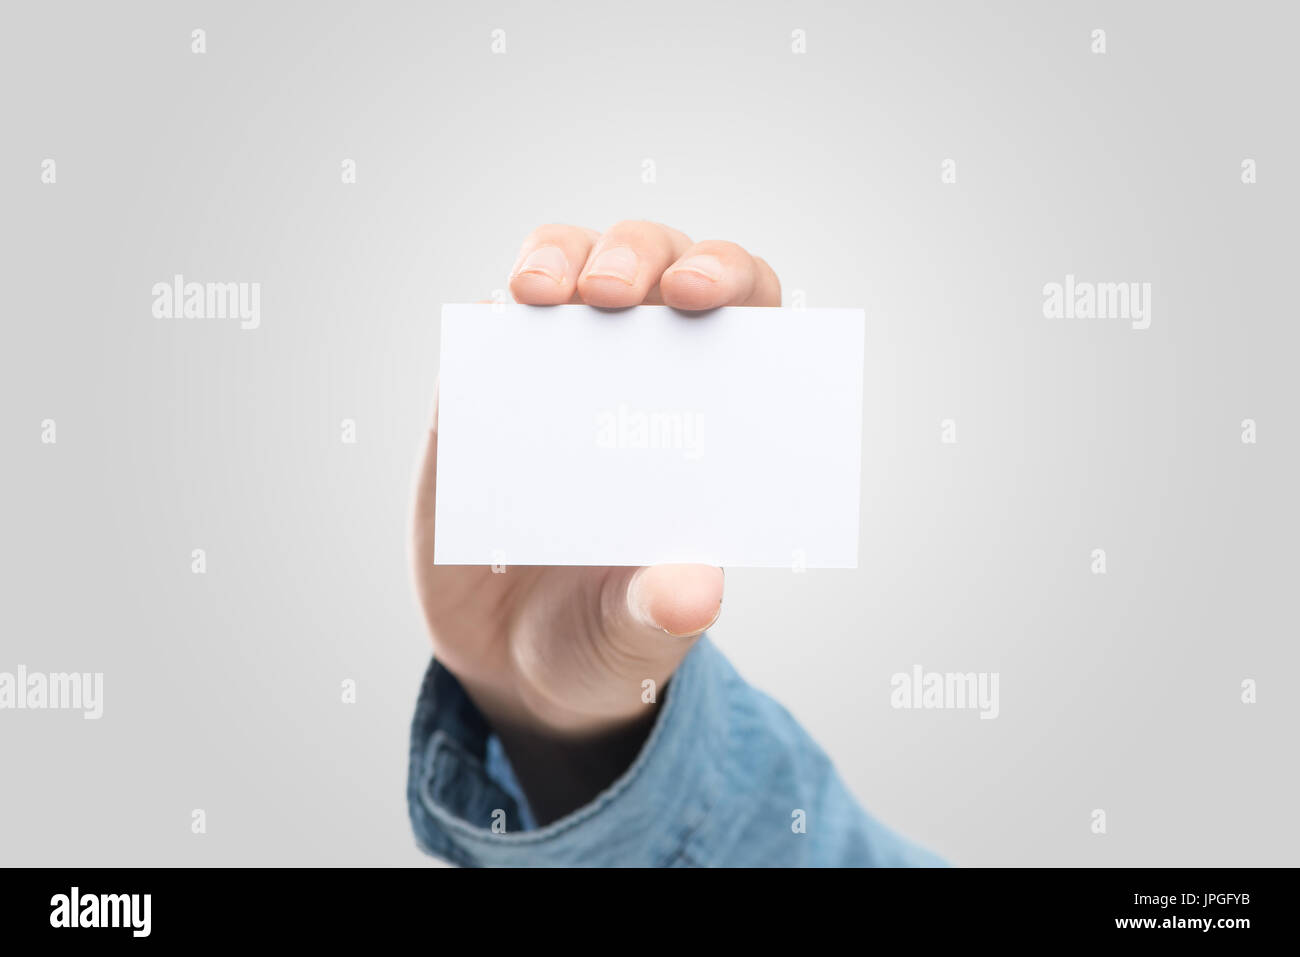 Male hand holding blank business card isolated Banque D'Images